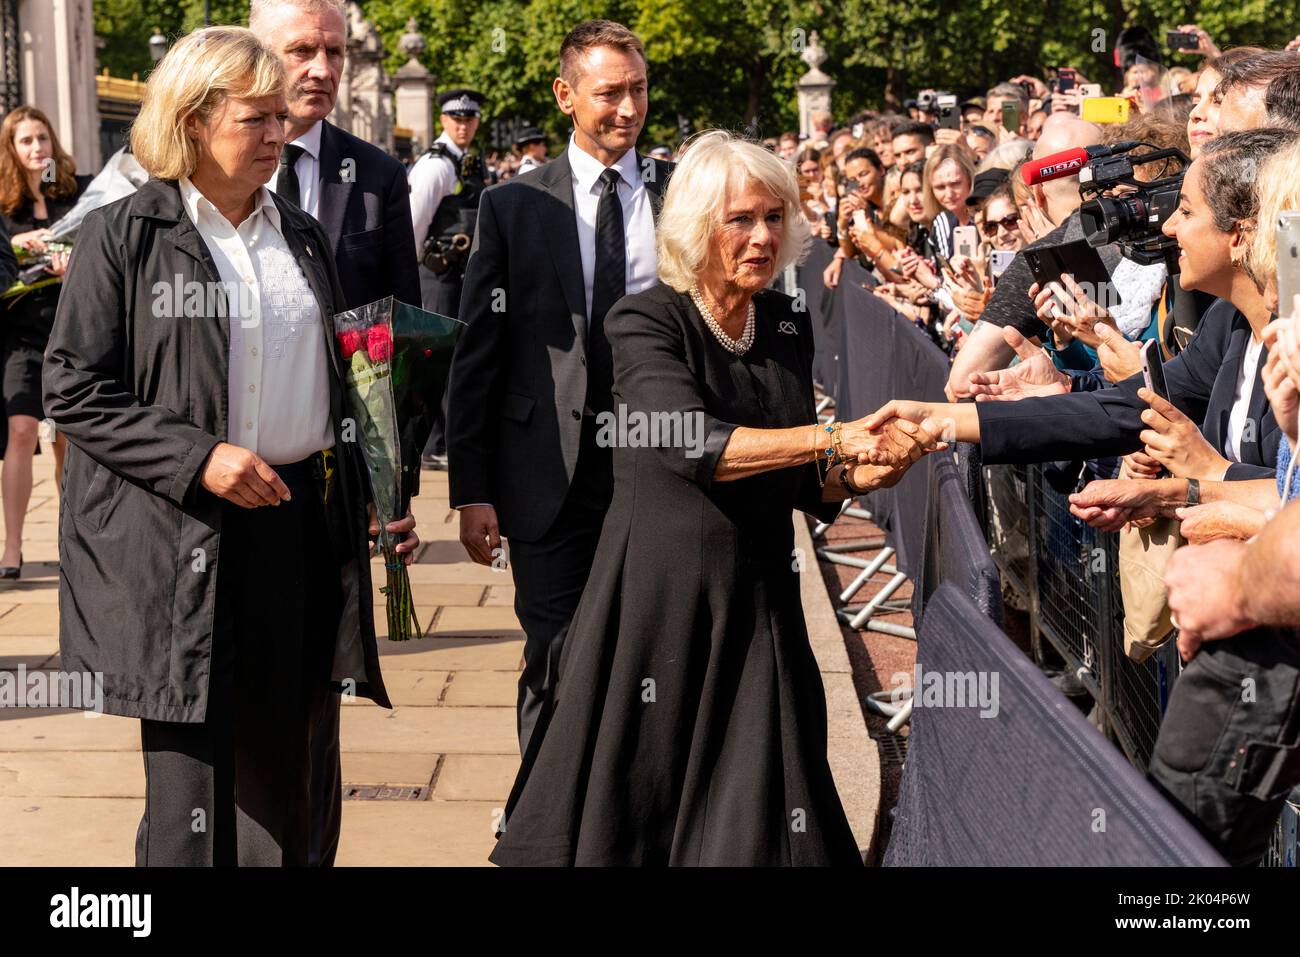 London, UK. 9th Sep, 2022. After the passing of Queen Elizabeth II, Camilla the Queen Consort arrives at Buckingham Palace from Balmoral and greets the waiting crowd. Credit: Grant Rooney/Alamy Live News Stock Photo